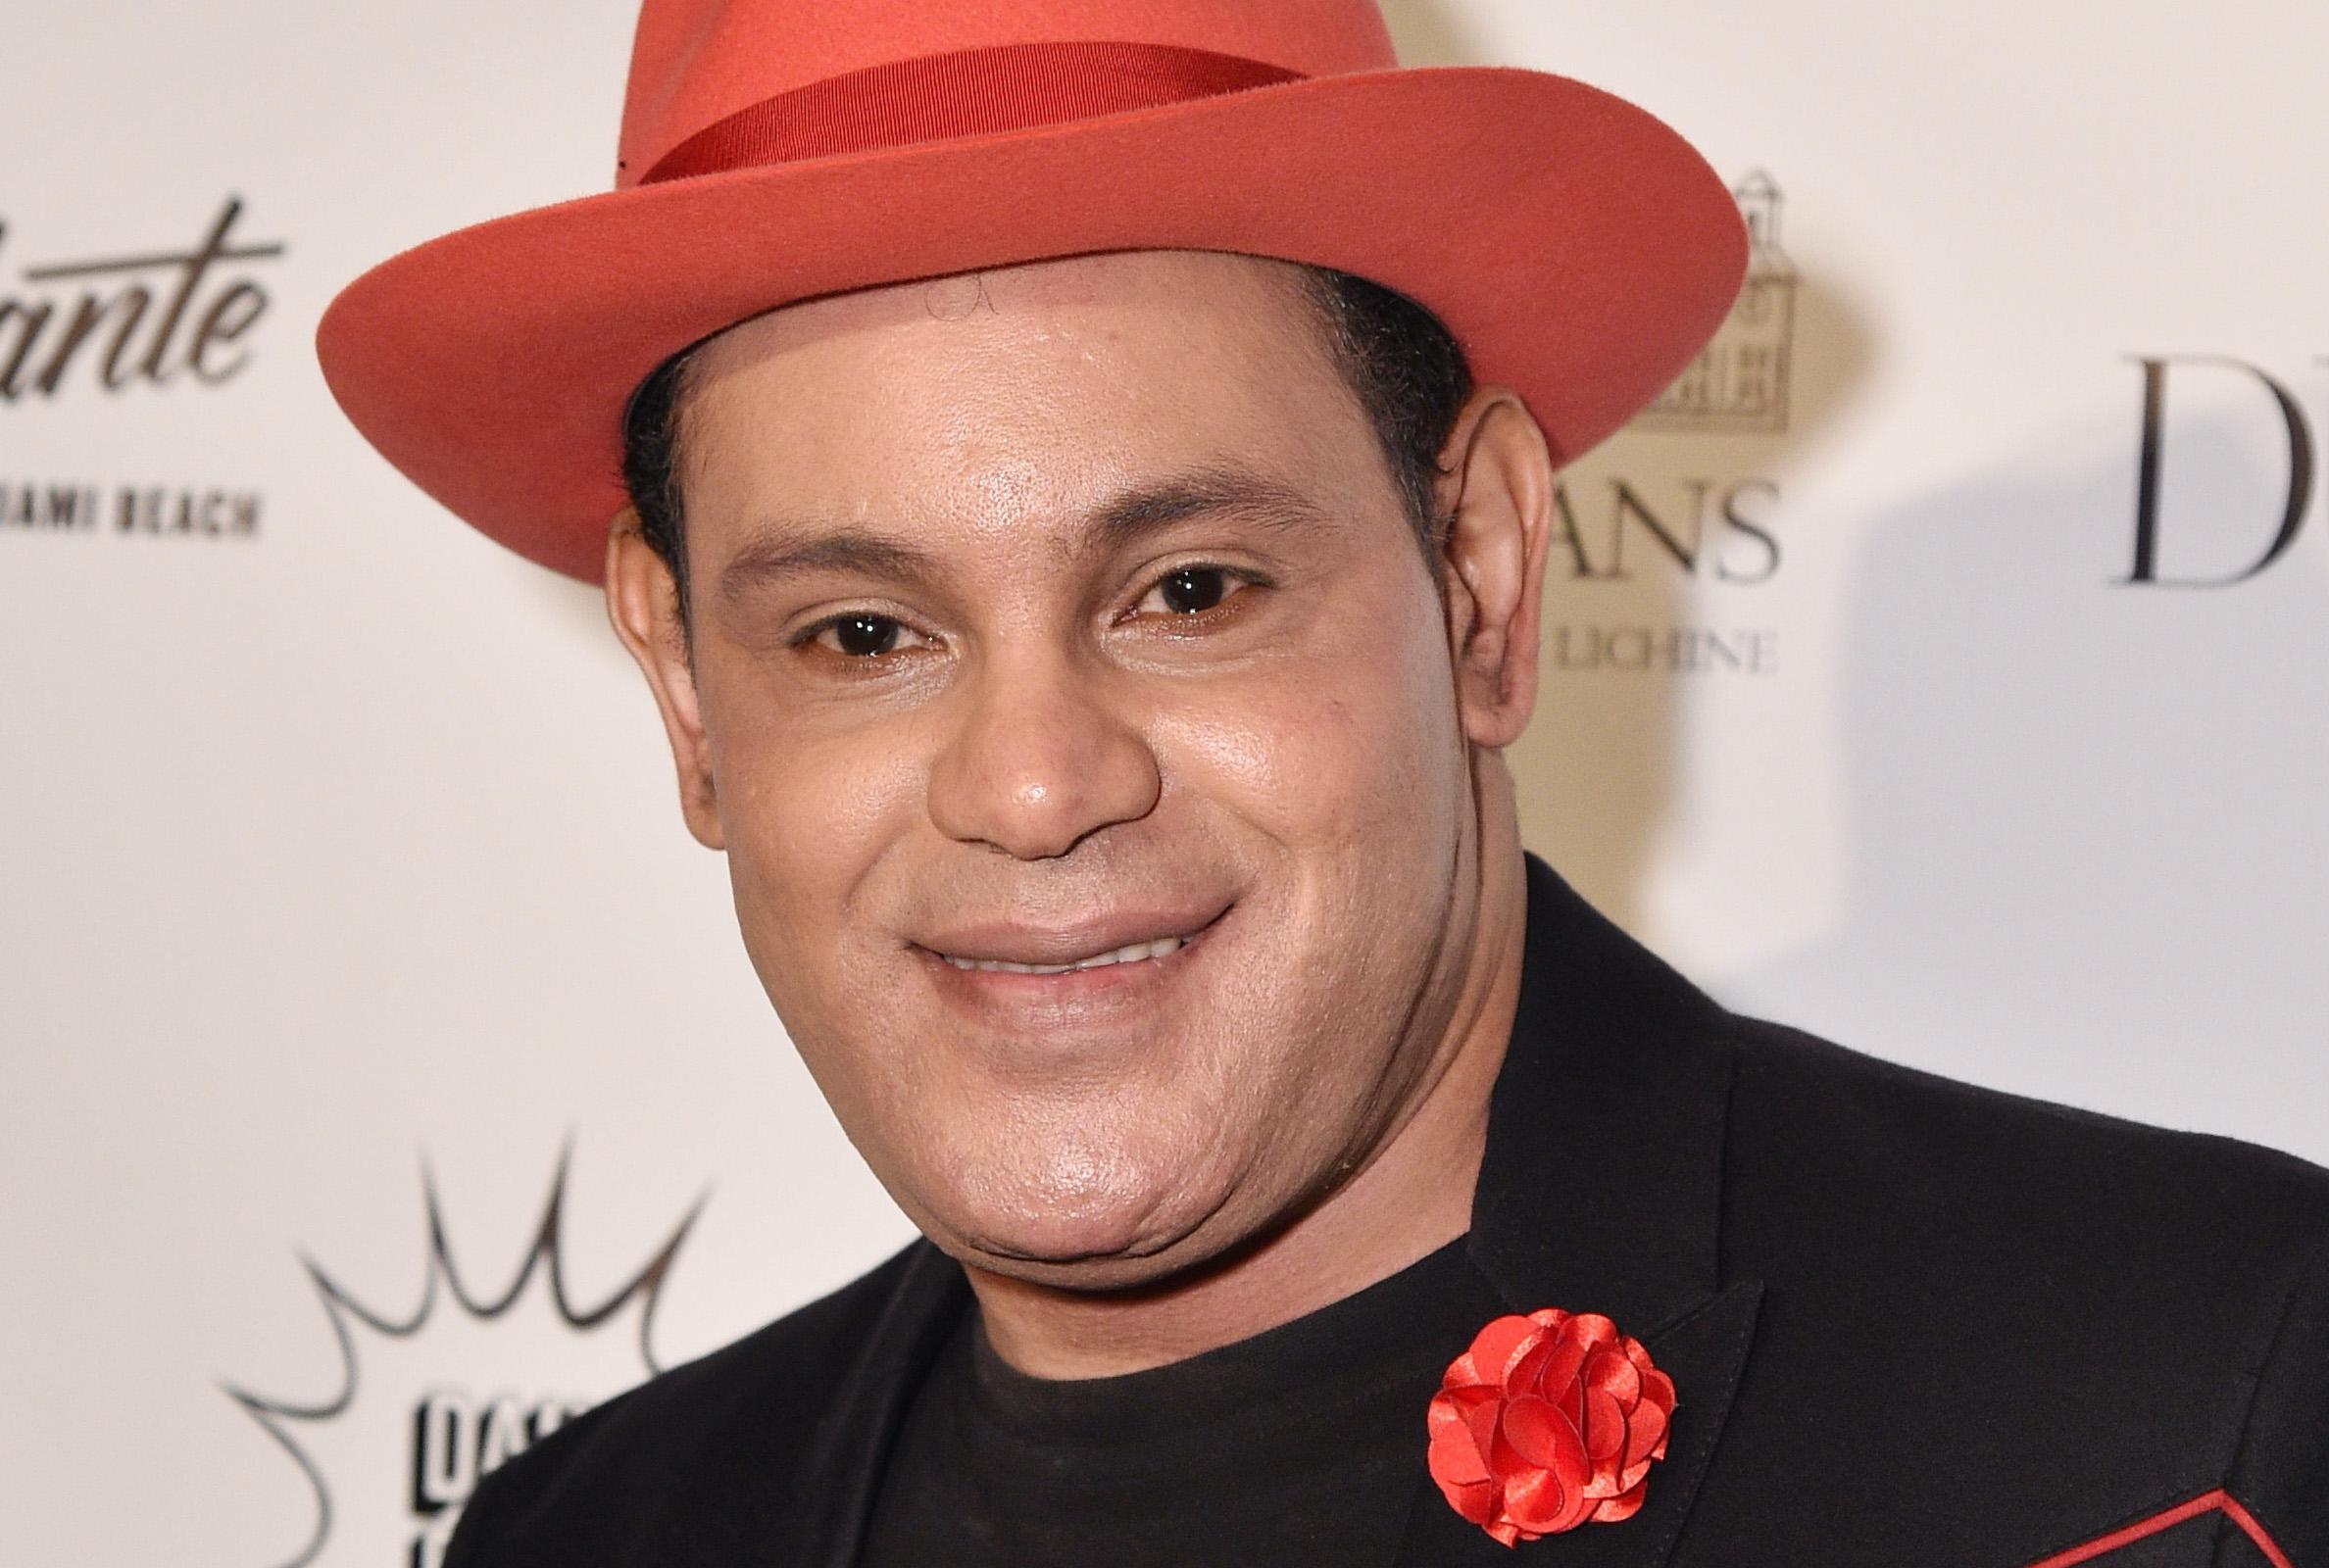 Sammy Sosa doesn't care what people think about his skin bleaching